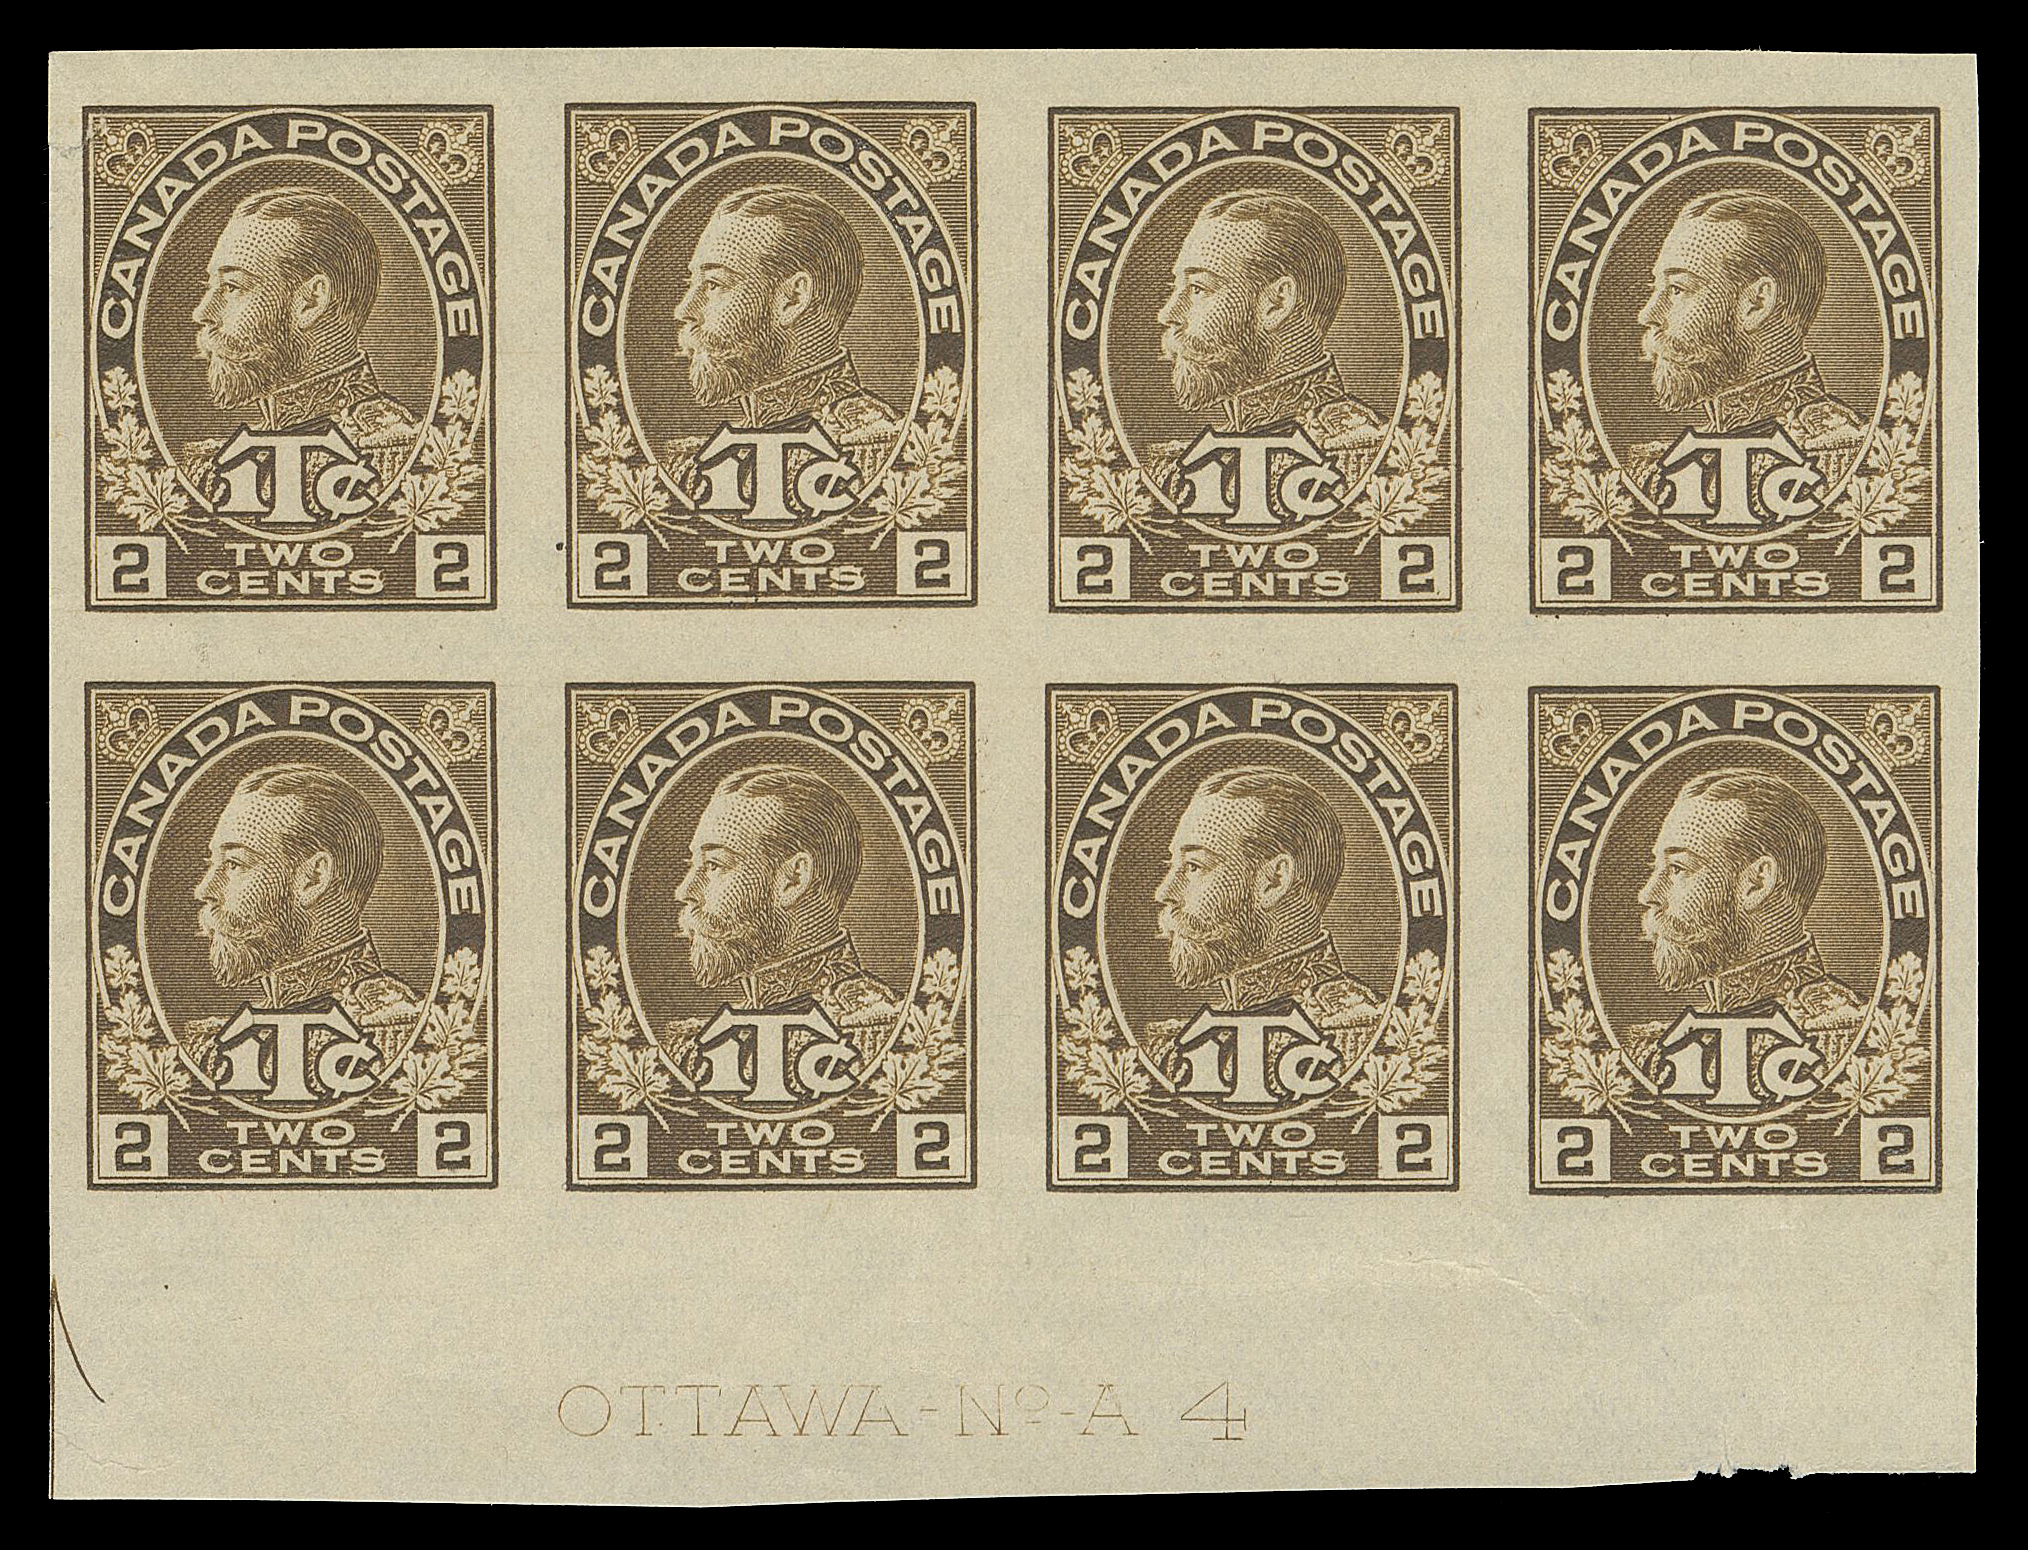 ADMIRAL STAMPS  MR4b,Lower left corner margin imperforate block of eight with complete Plate 4 imprint, part of guide arrow visible at left; minute wrinkle in selvedge; a rare imperforate plate block, VF

Provenance: C.M. Jephcott (private sale circa. 1980s)